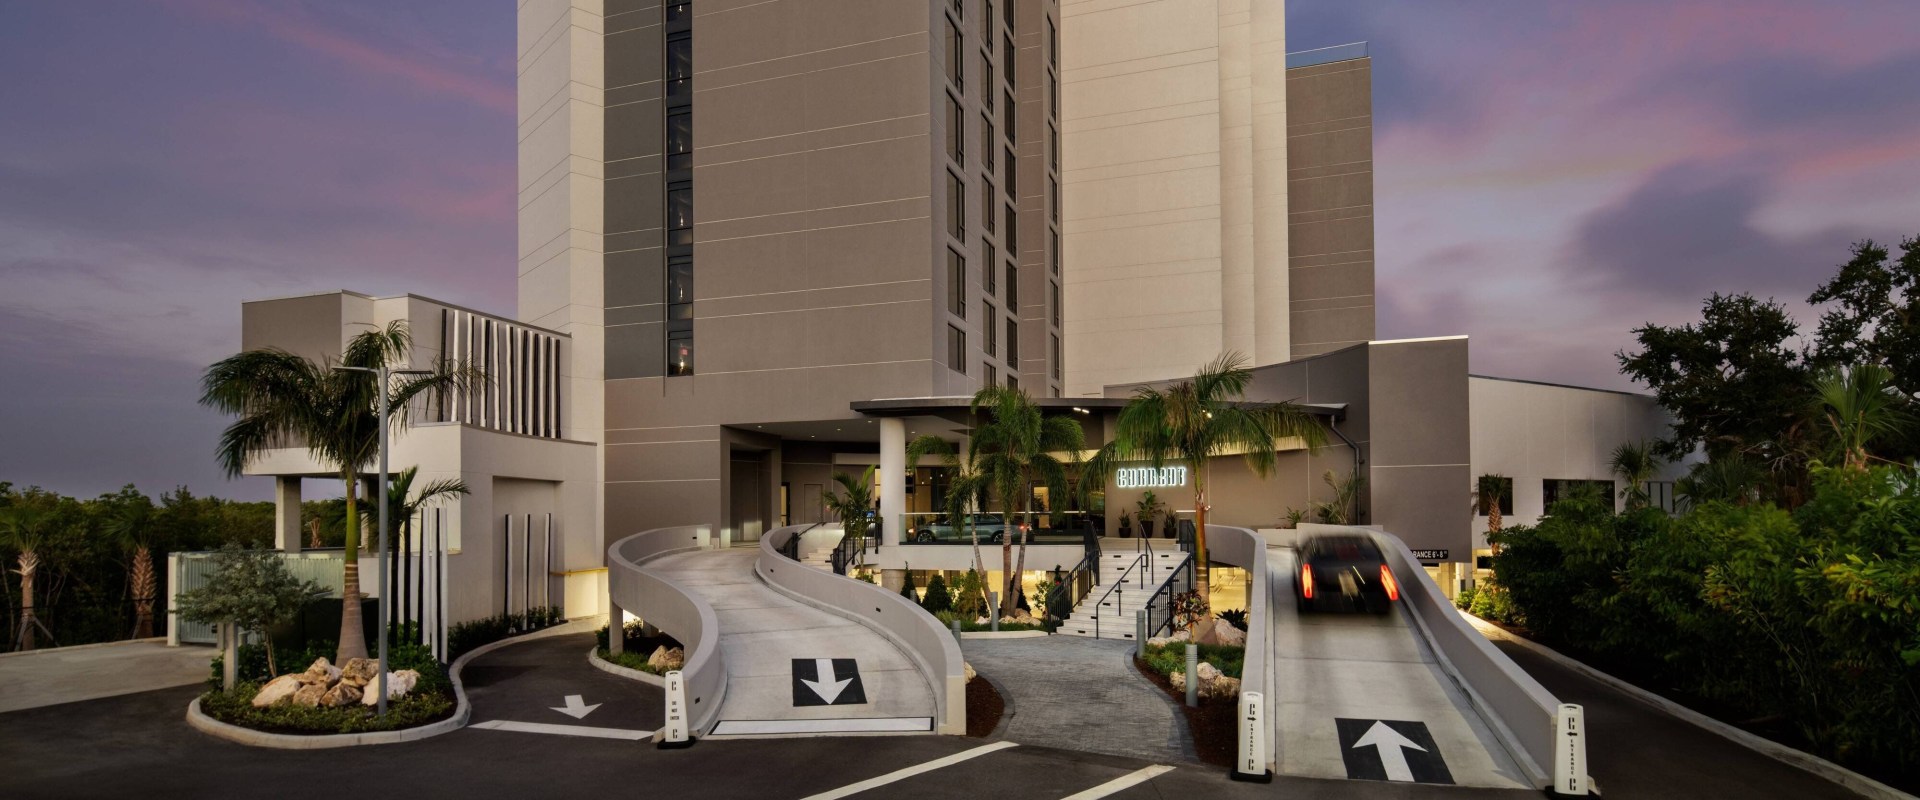 The Current Hotel Tampa: A New Addition to the Tampa Bay Region